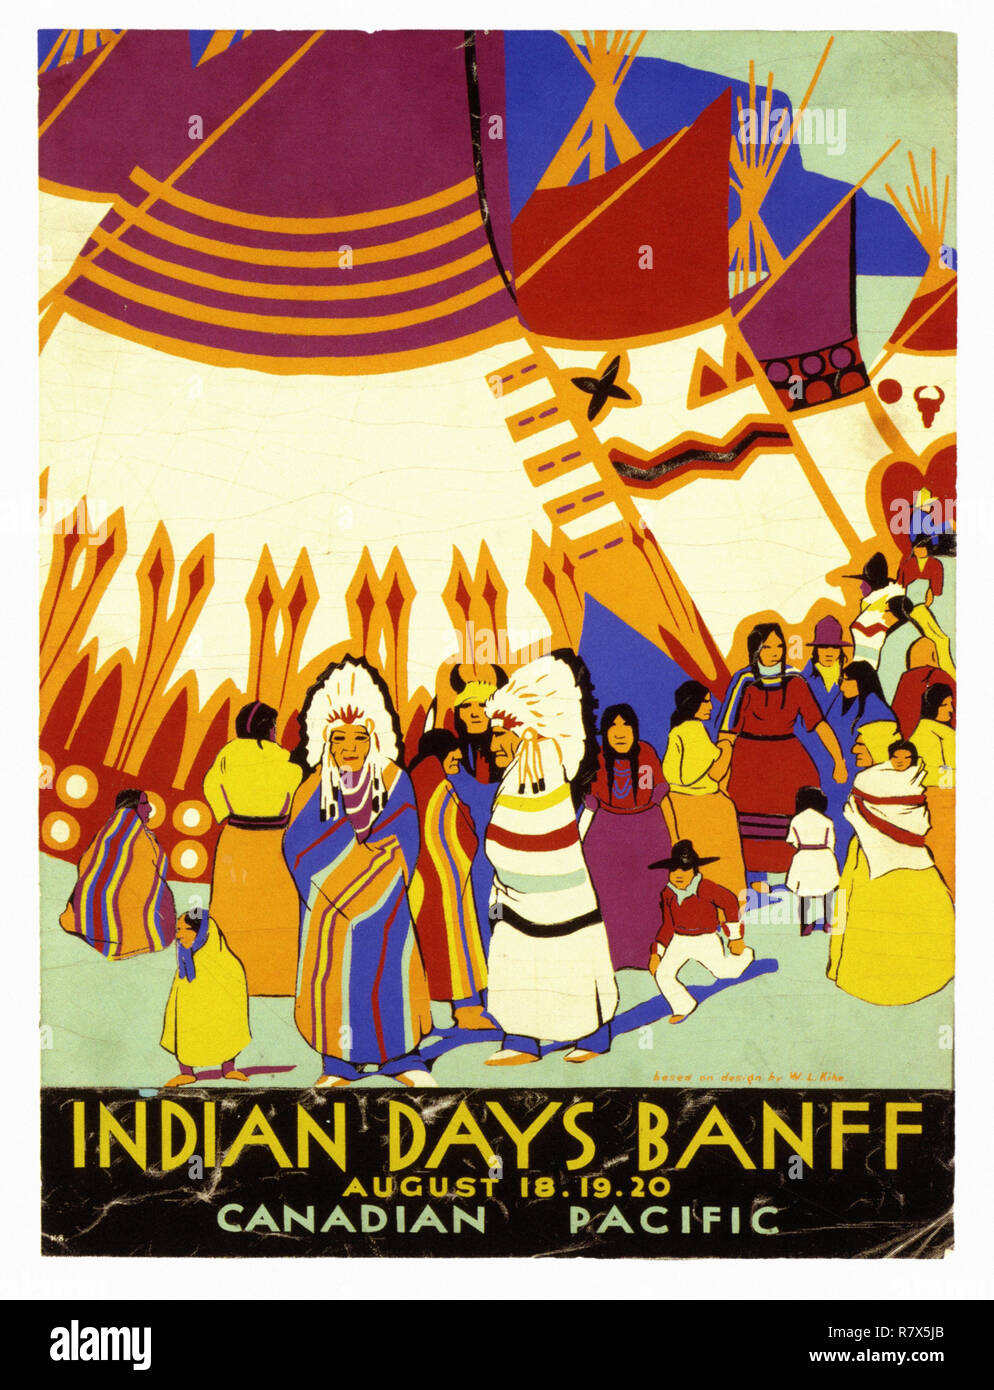 Canadian Pacific - Banff Indian Days - Vintage Travel Poster Stock Photo